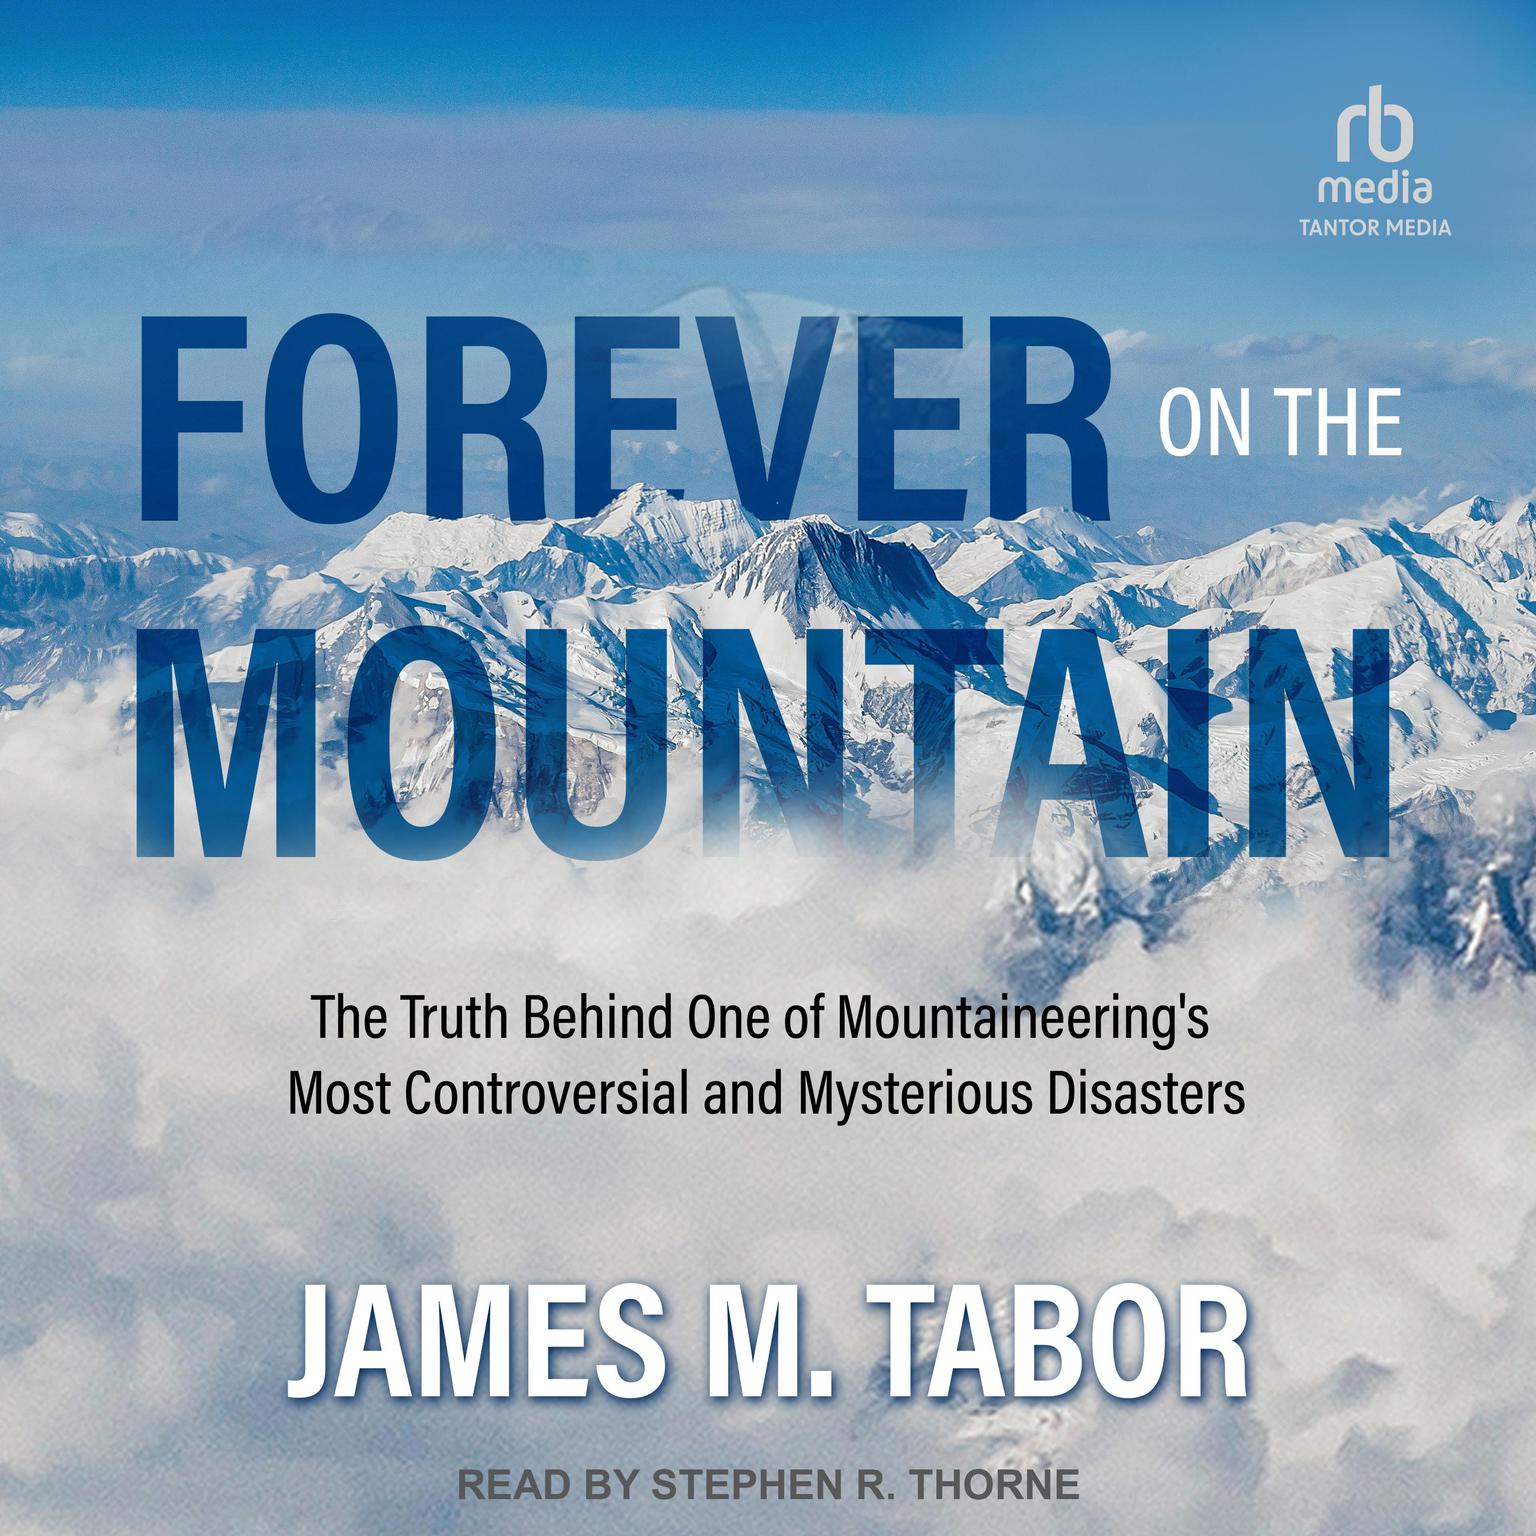 Forever on the Mountain: The Truth Behind One of Mountaineerings Most Controversial and Mysterious Disasters Audiobook, by James M. Tabor